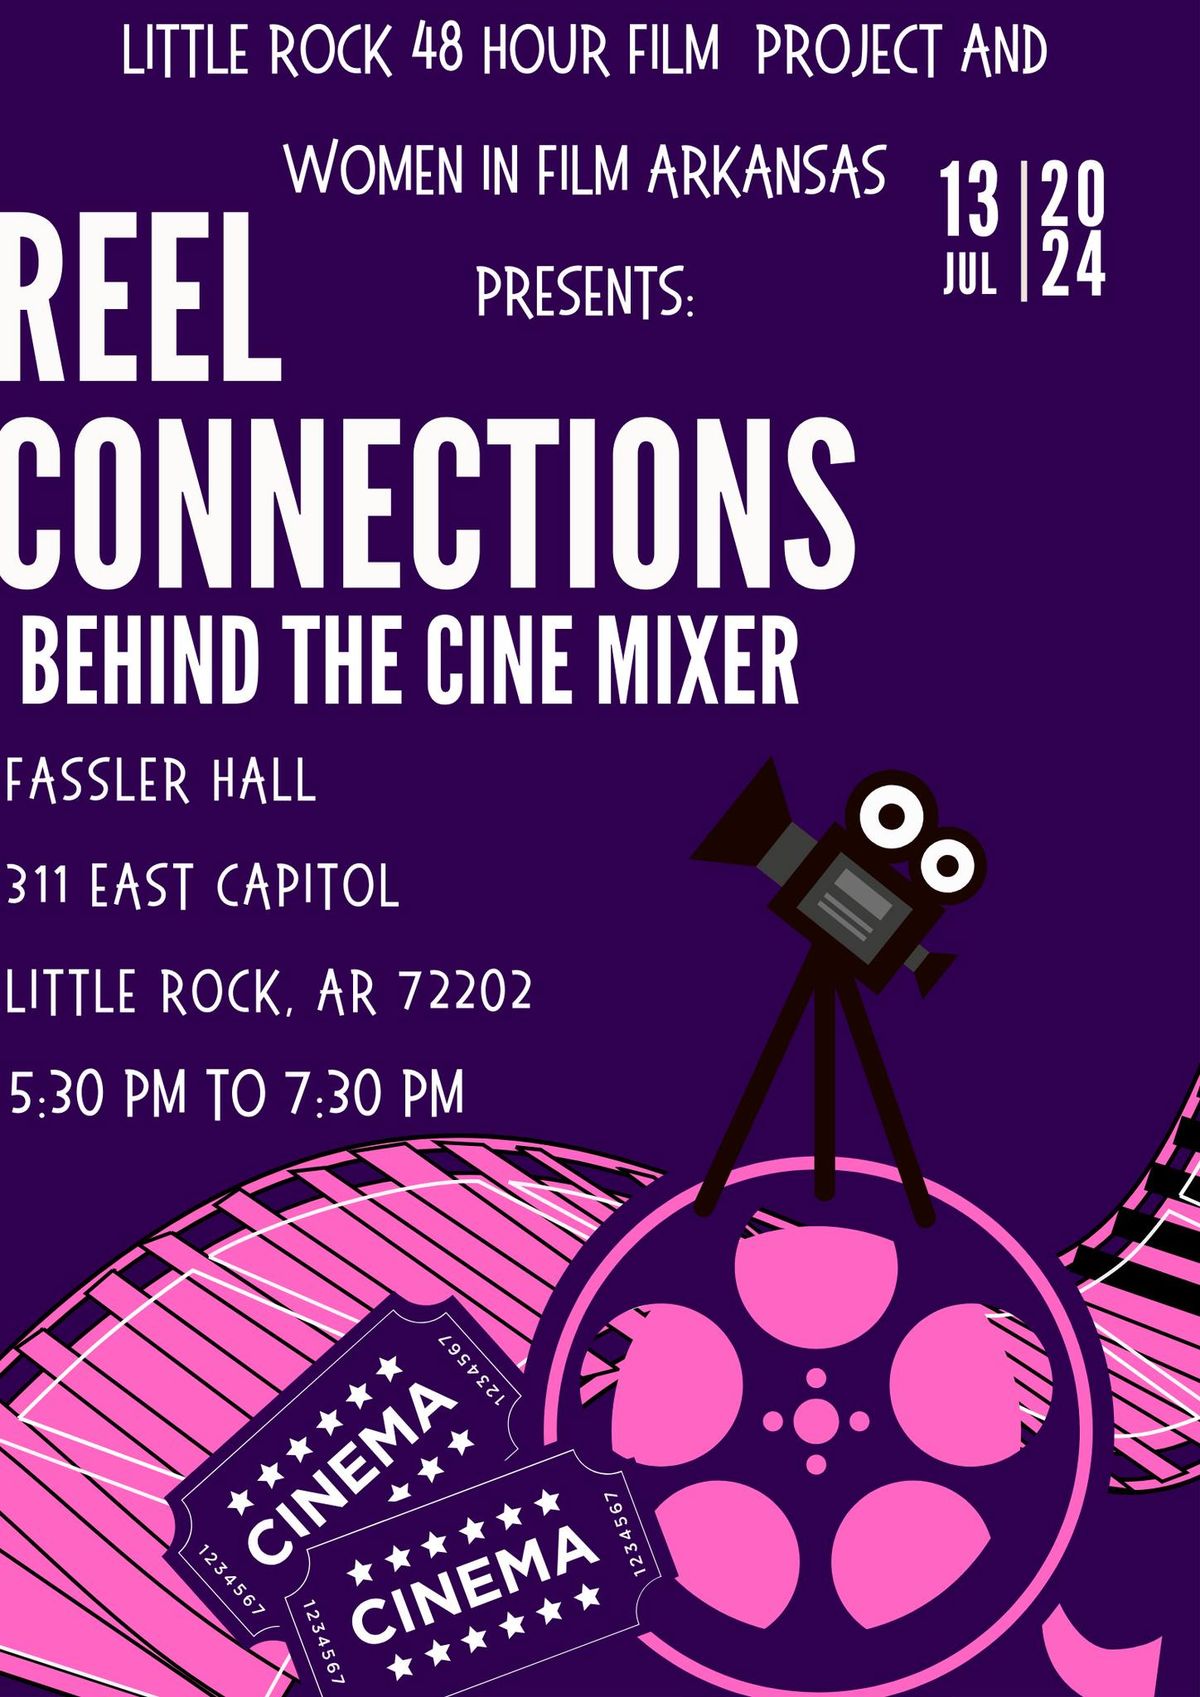 Let's Make a REEL Connection! Behind the Cine Mixer!